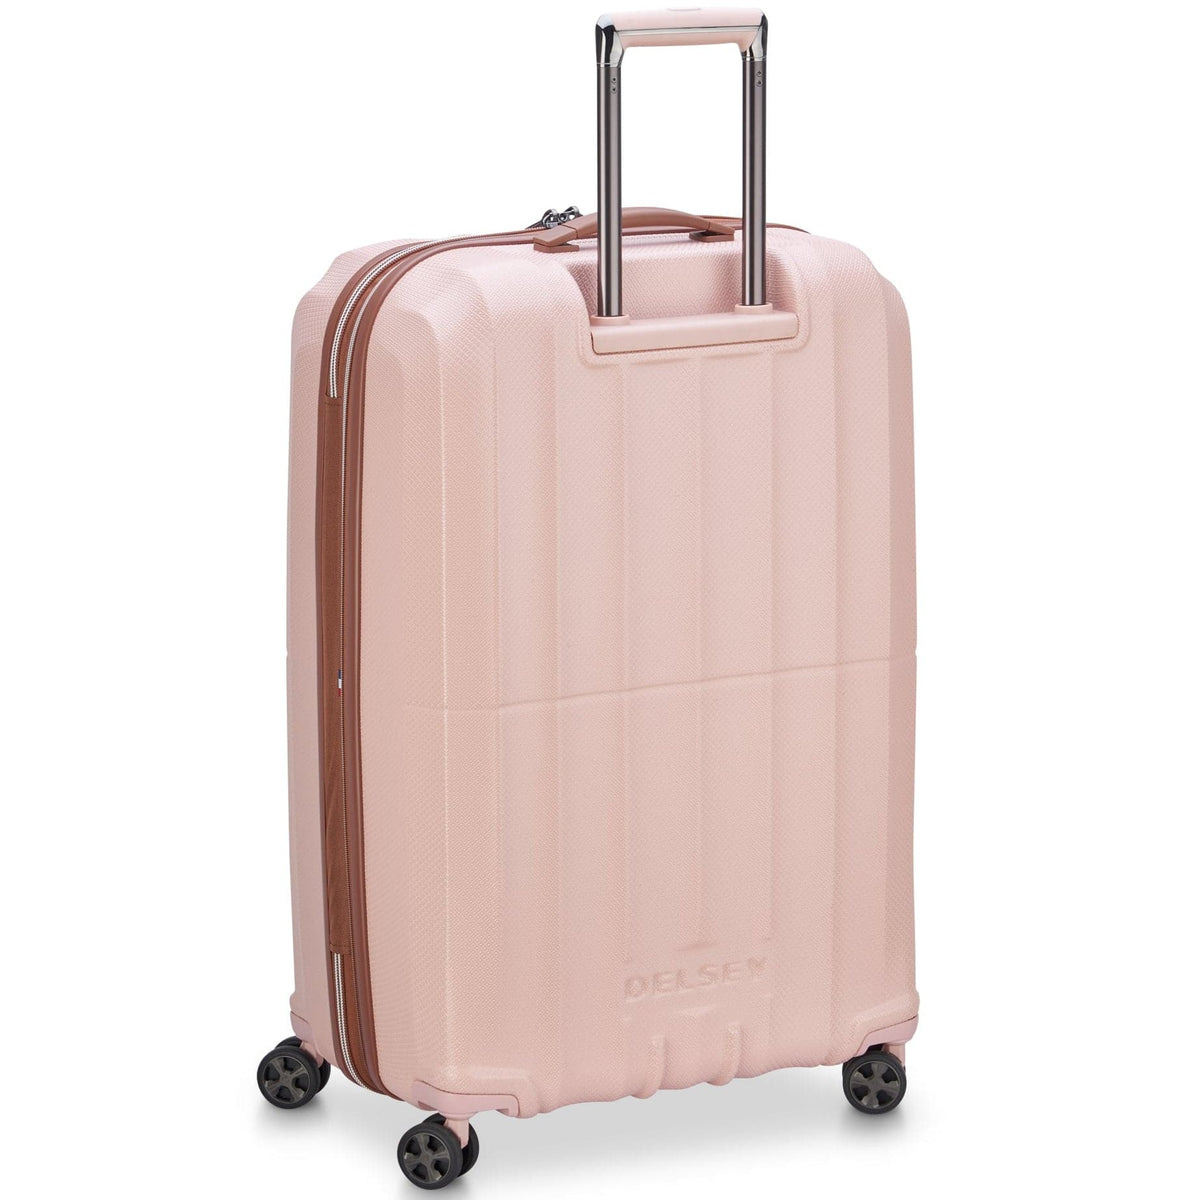 Delsey ST. Tropez Hardside Expandable Spinner Checked Luggage - 28" Large